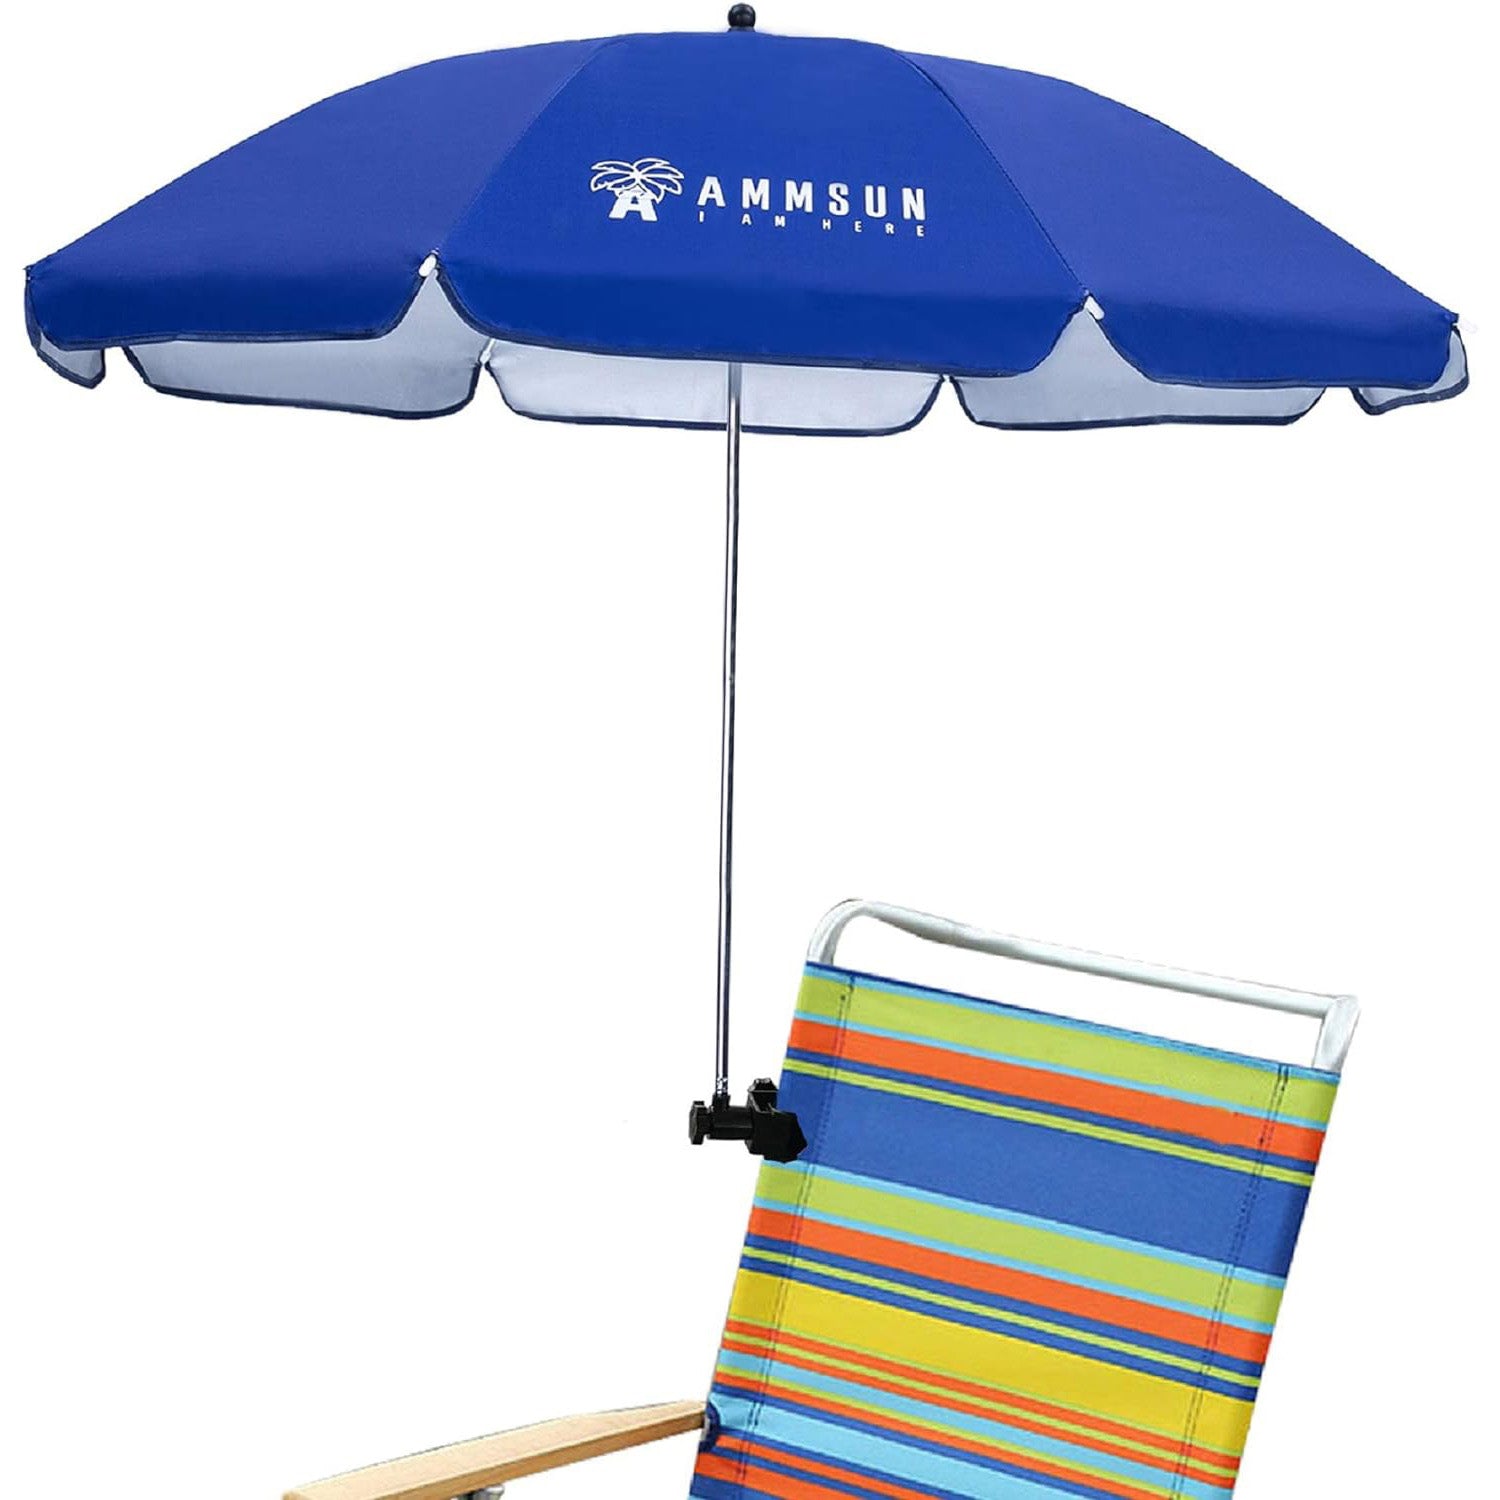 AMMSUN 43 inches Chair Umbrella with Universal Clamp Blue